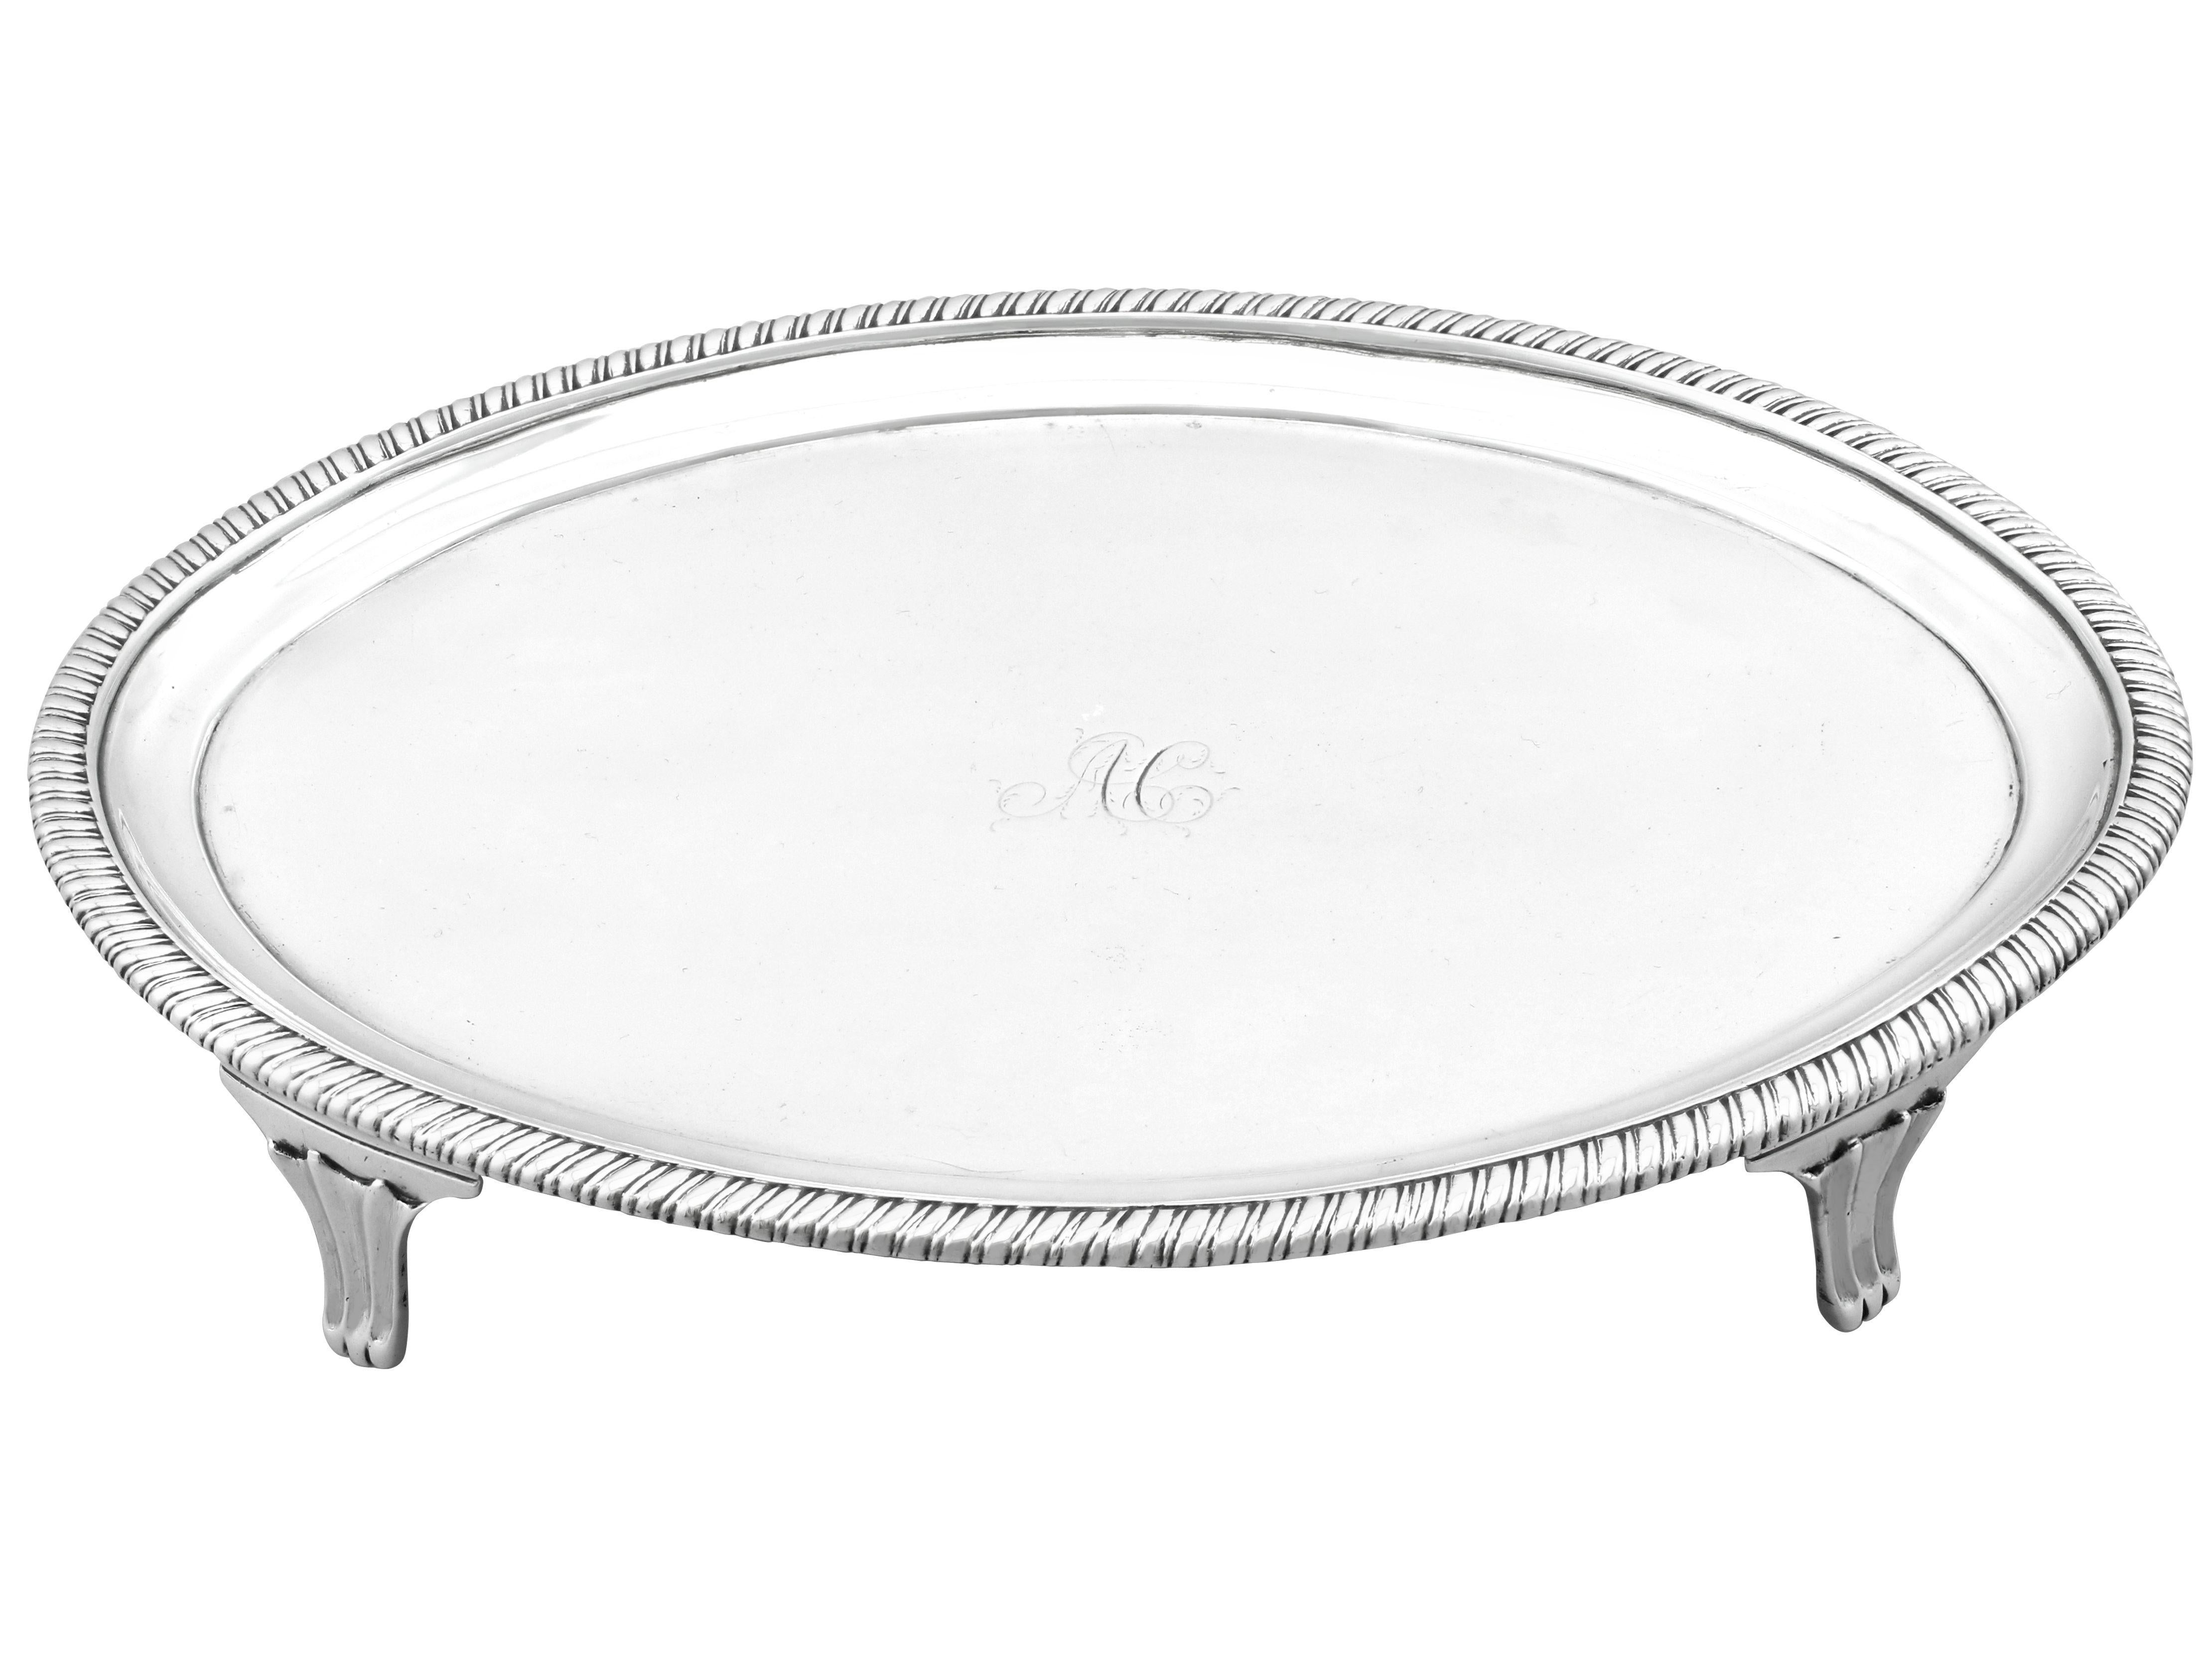 An exceptional, fine and impressive antique Georgian Irish sterling silver teapot stand/waiter; an addition to our ornamental silverware collection

This exceptional antique Georgian Irish sterling silver teapot stand/waiter has an oval